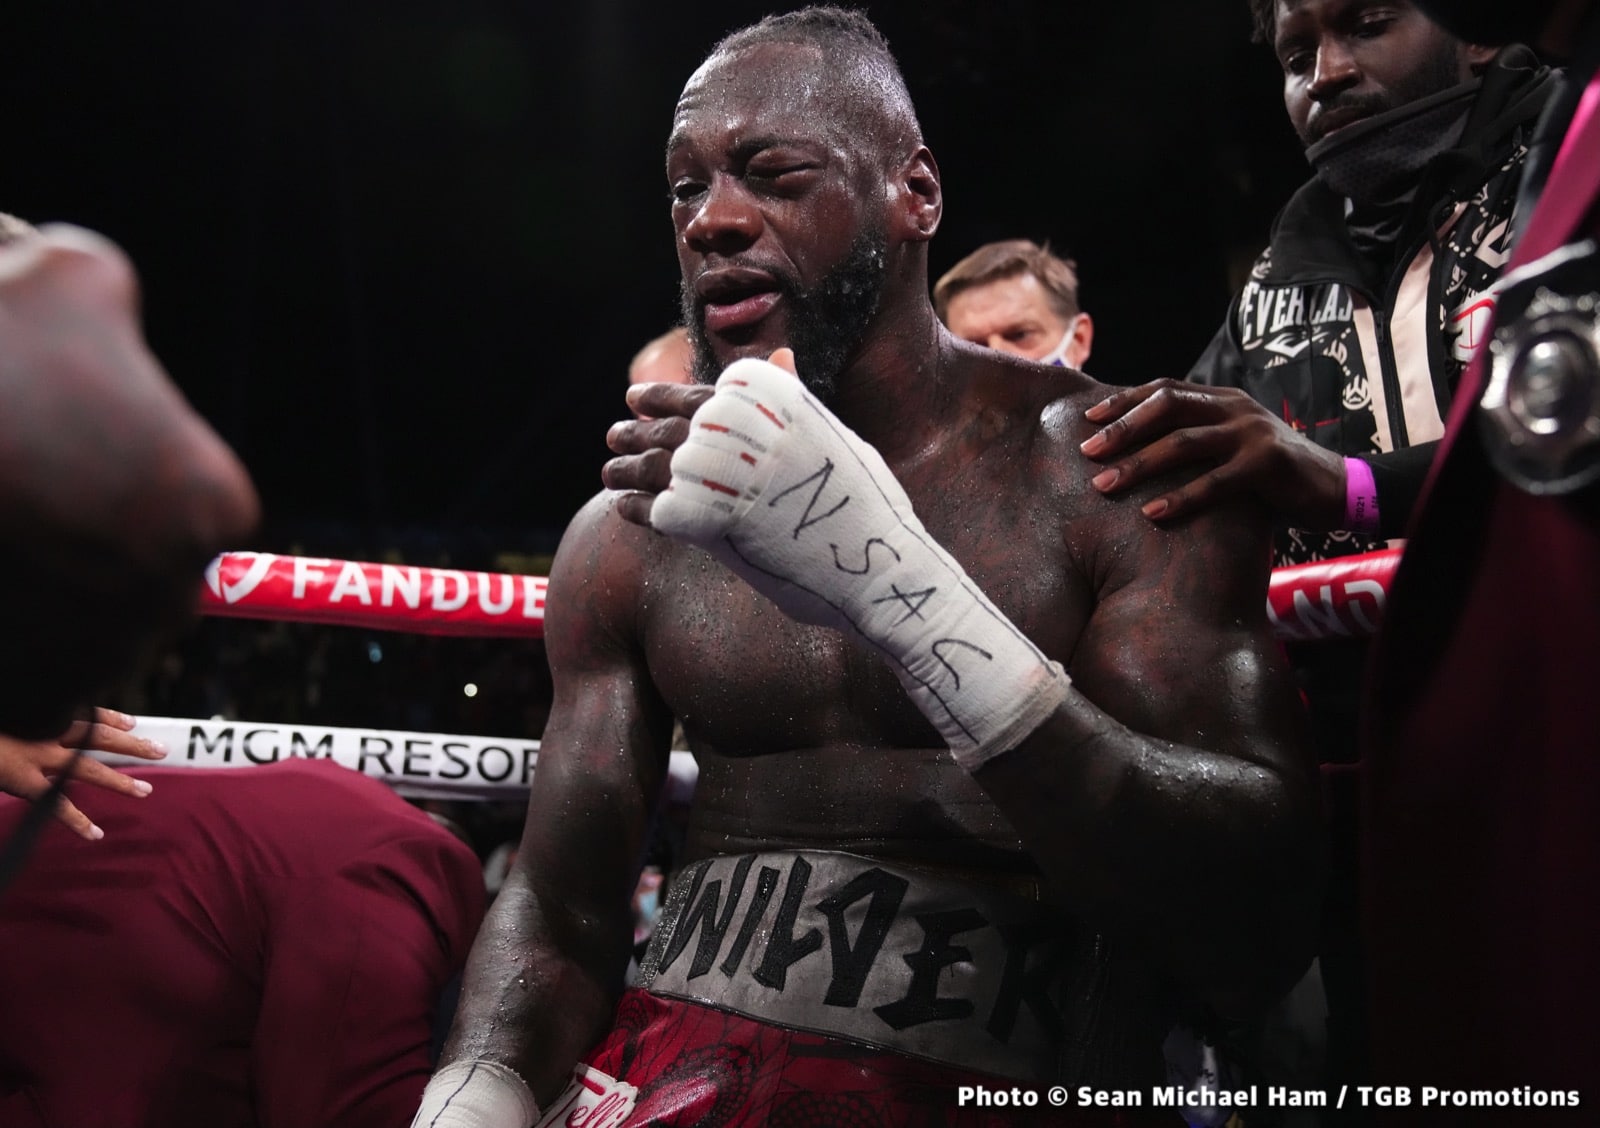 Deontay Wilder does "respect" Tyson Fury says manager Shelly Finkel